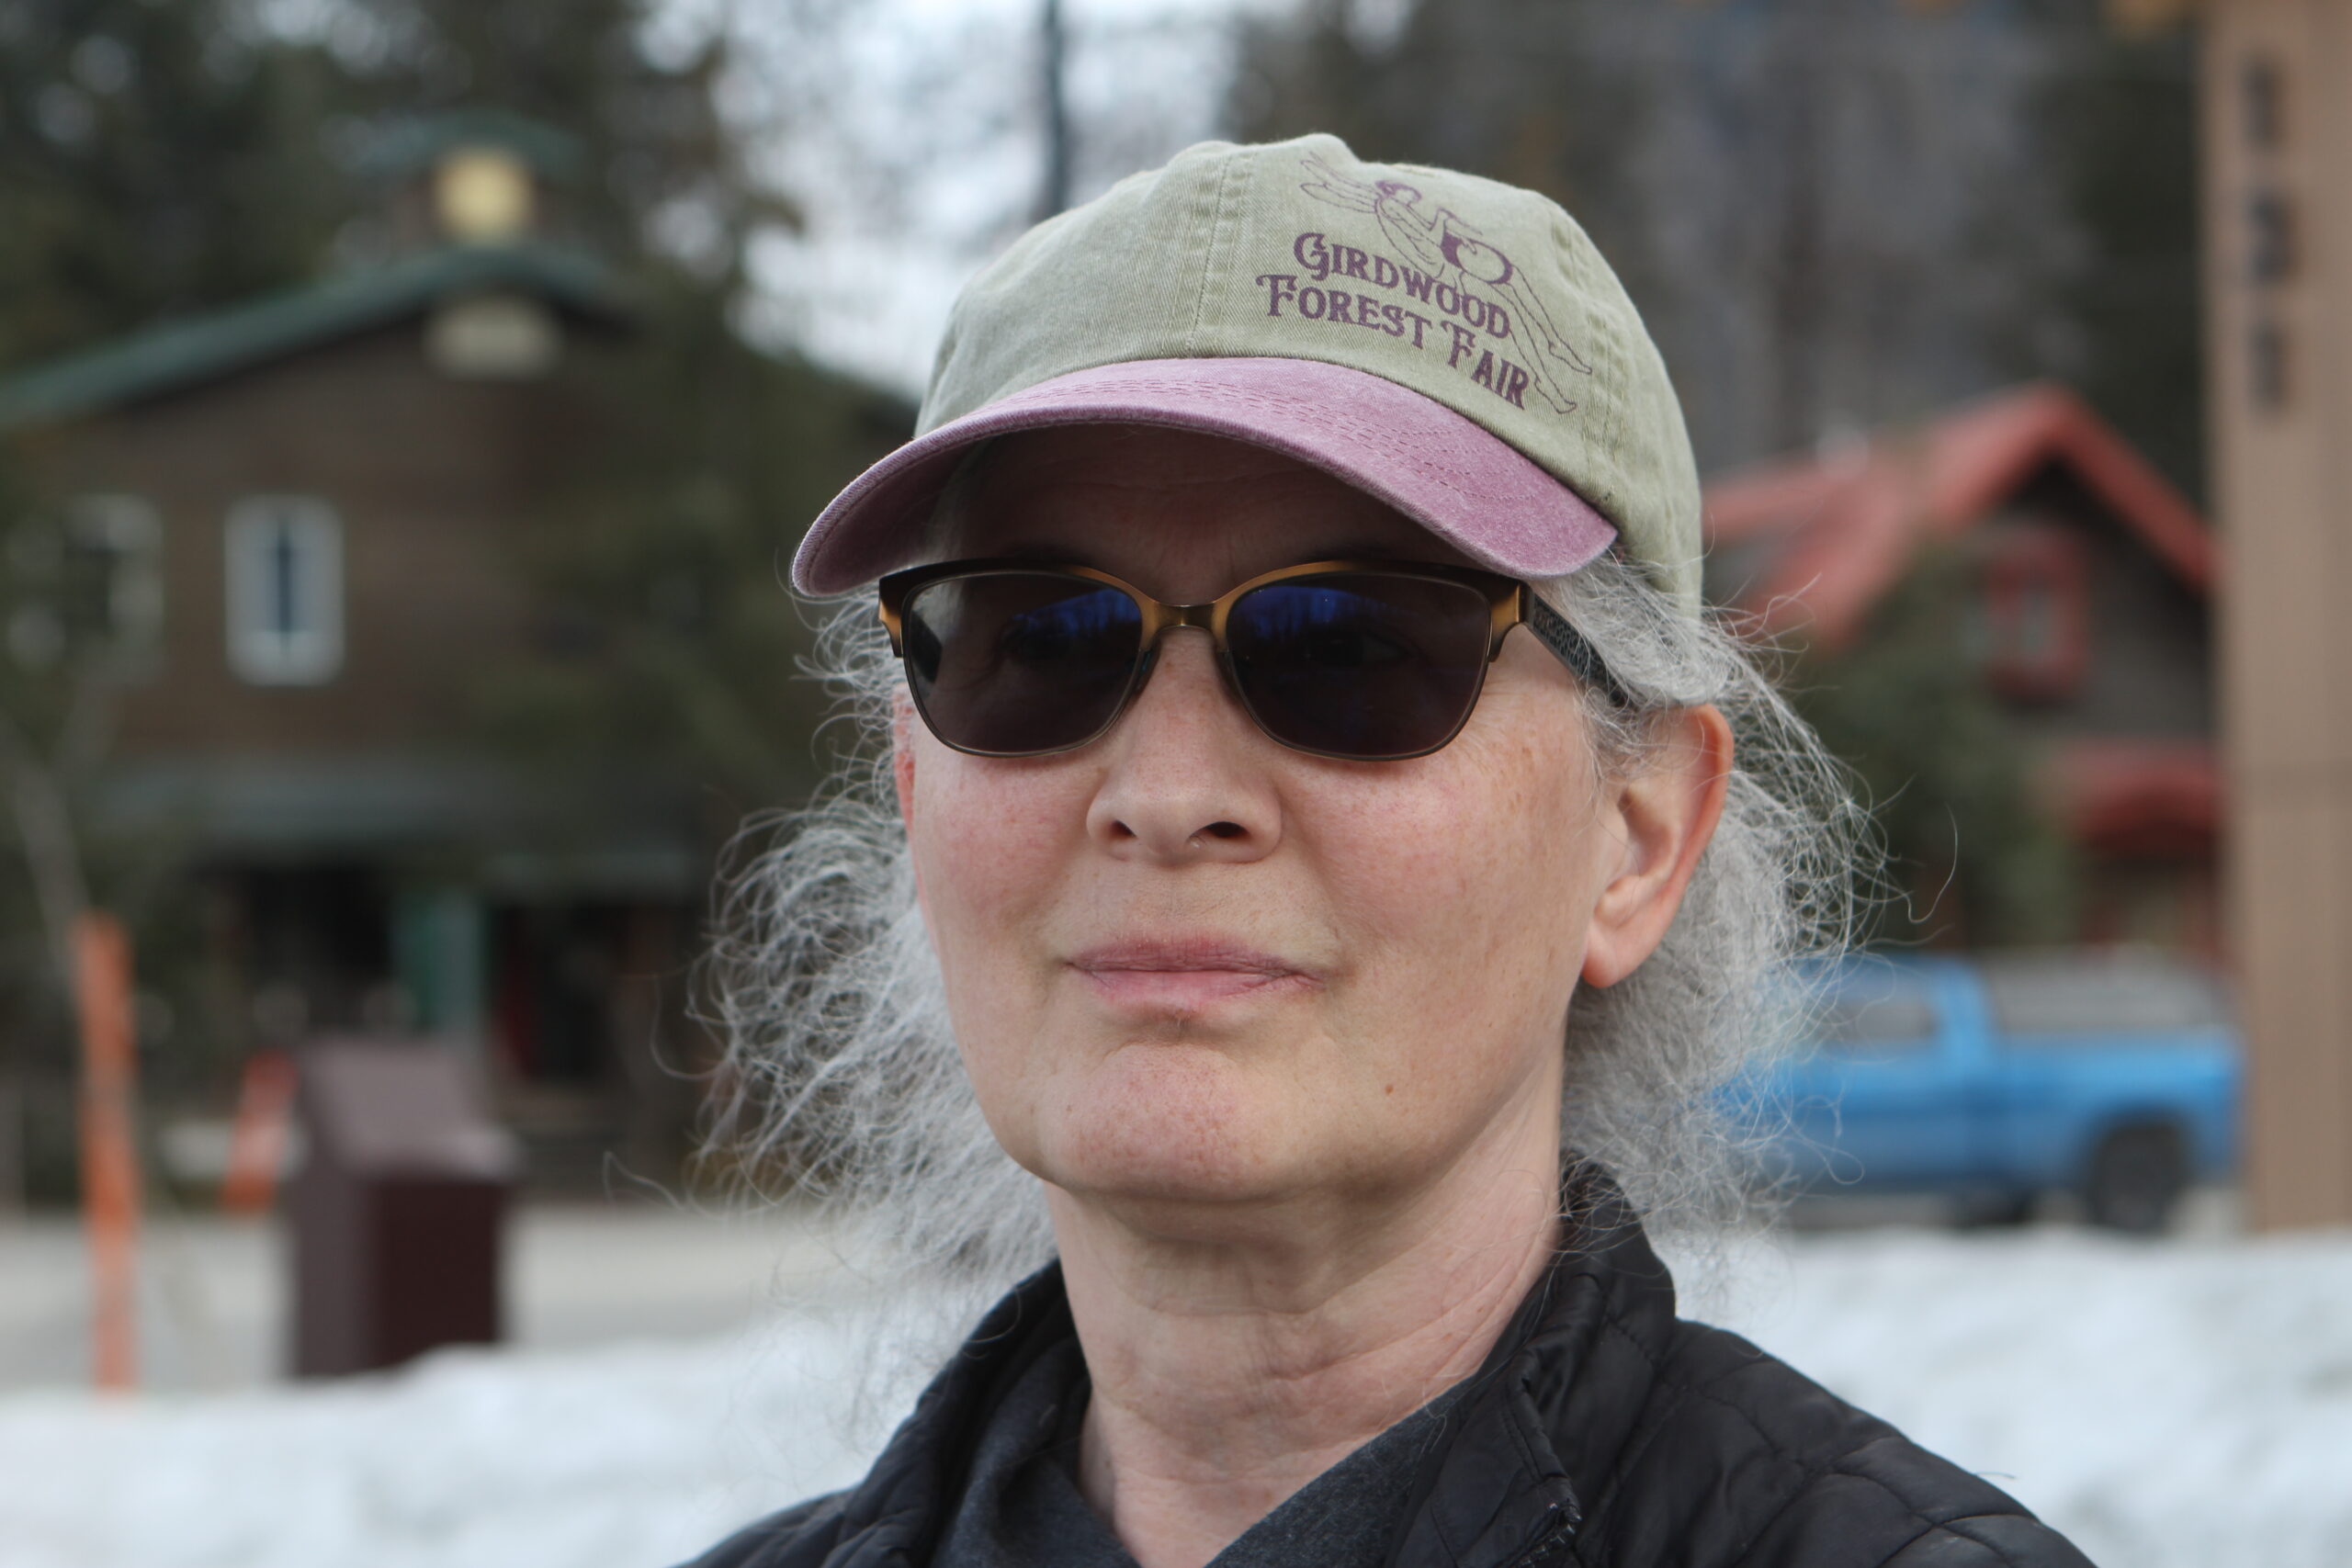 a woman in sunglasses and a baseball cap